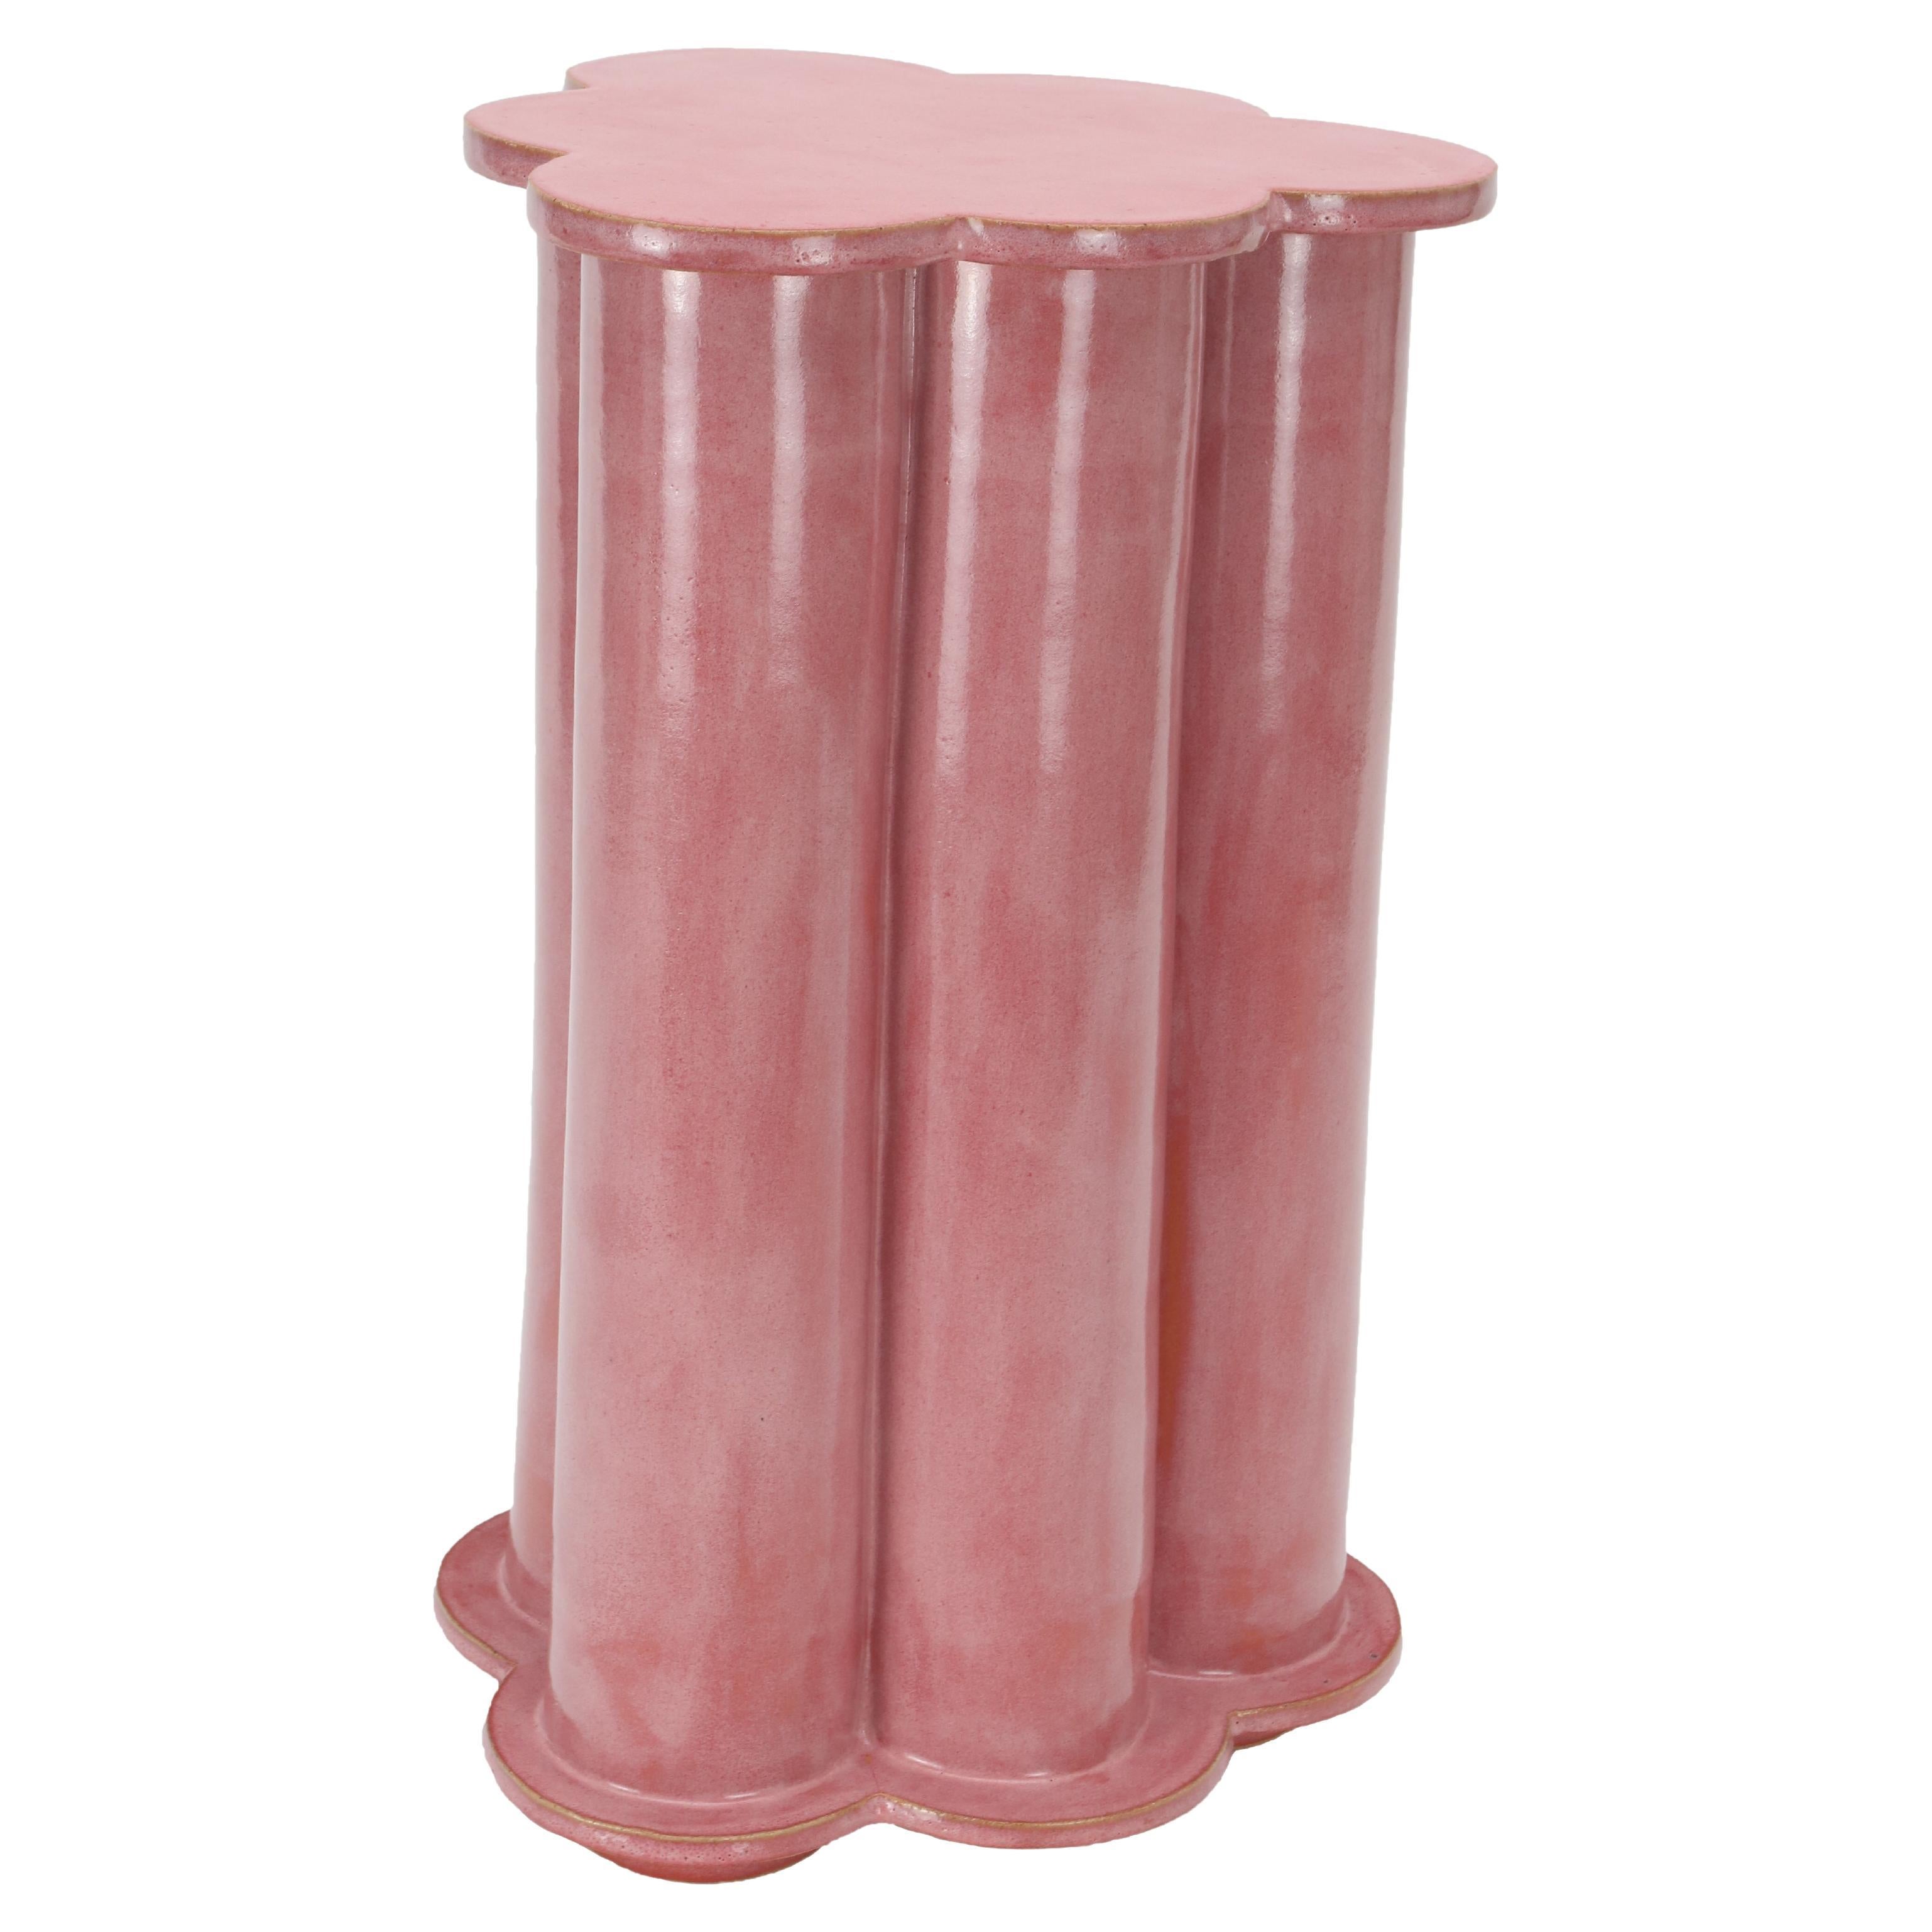 Tall Ruffle Ceramic Side Table & Stool in Sunset Pink by Bzippy For Sale